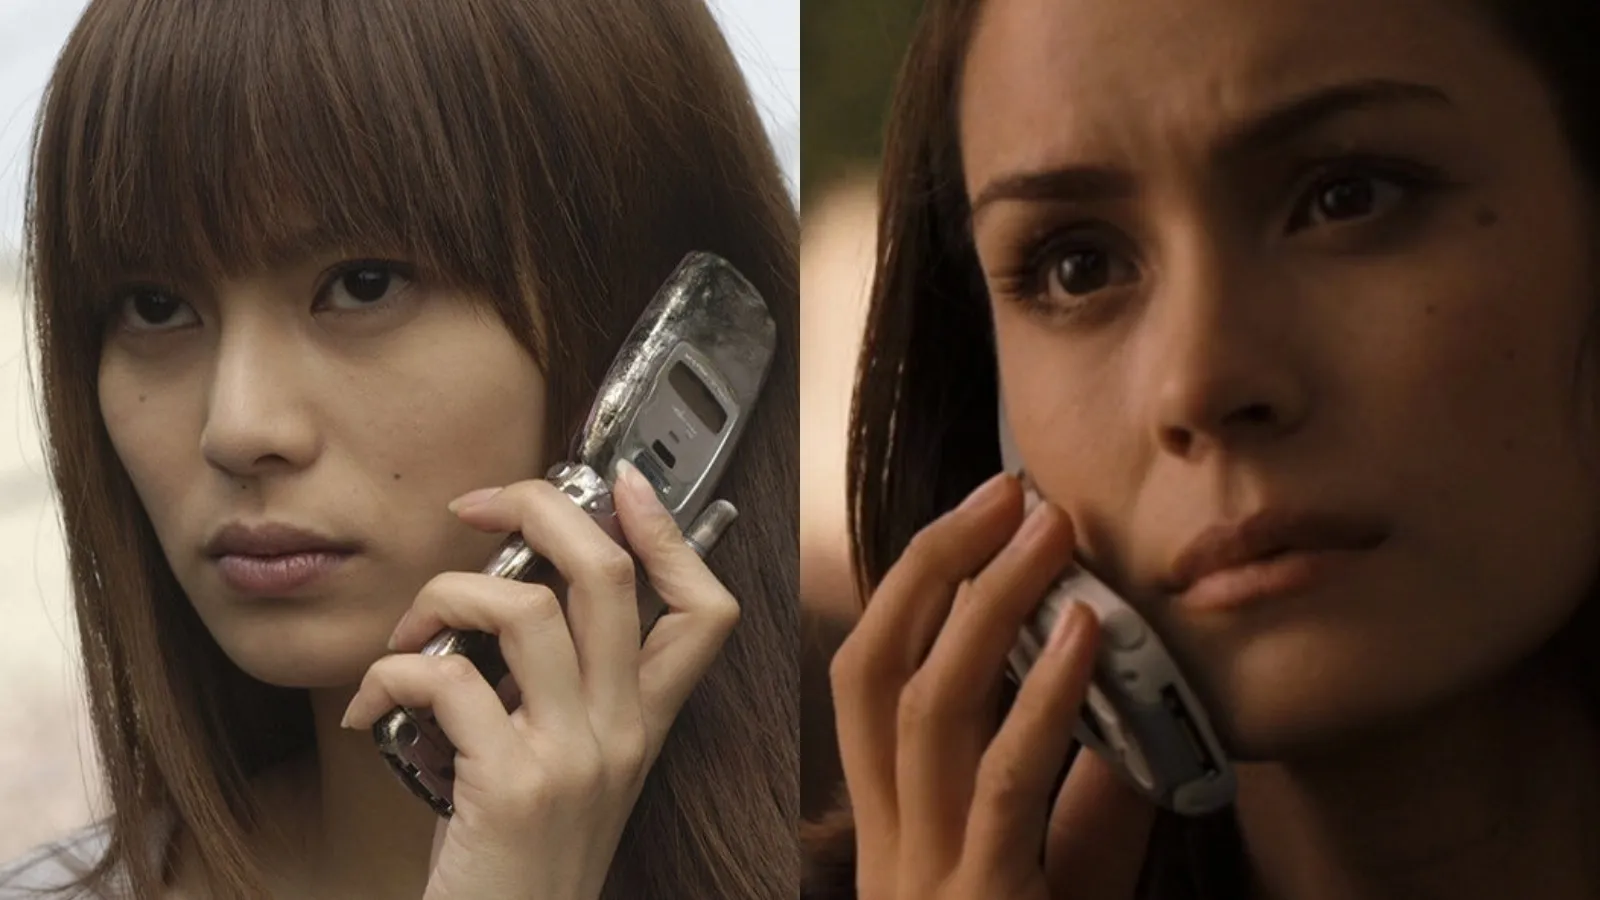 Screengrabs from One Missed Call (2003) (left) and One Missed Call (2008) (right)